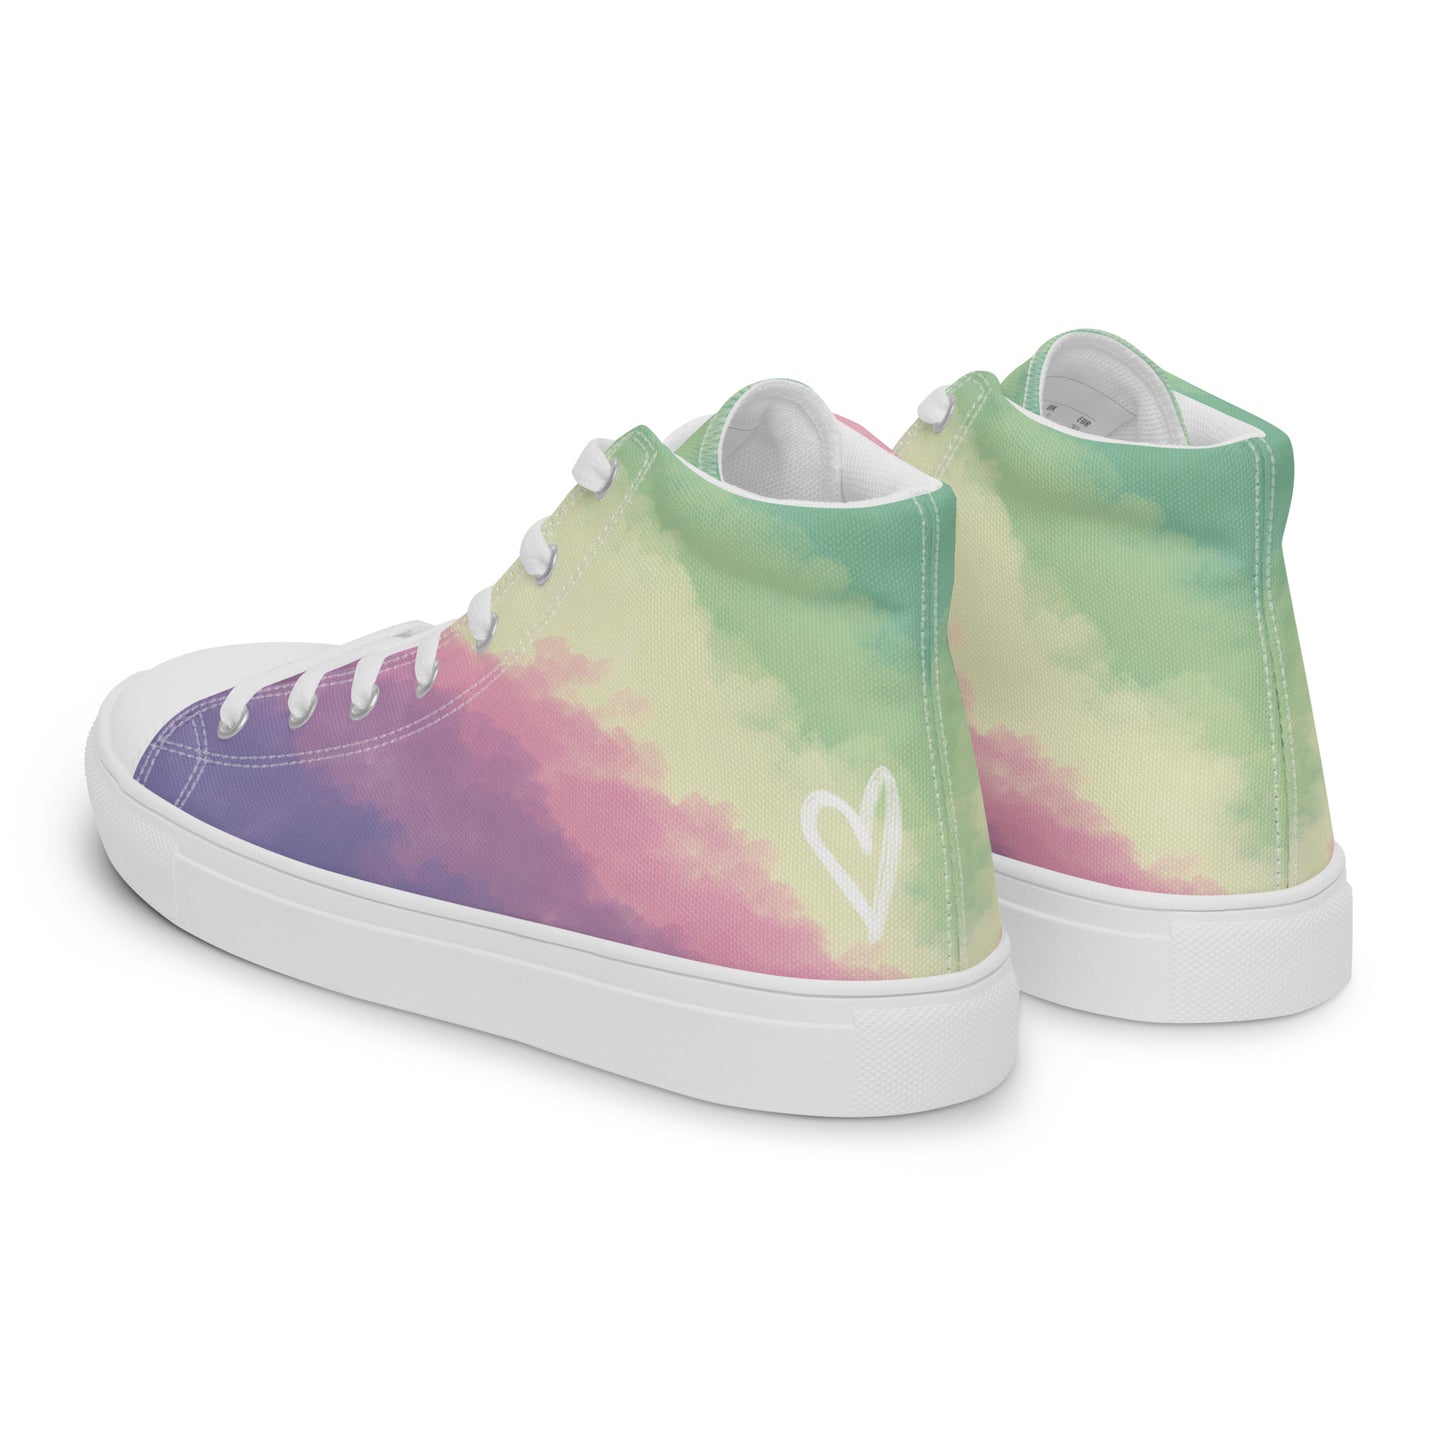 Cloudy Genderfae High Top Canvas Shoes (Masc Sizing)